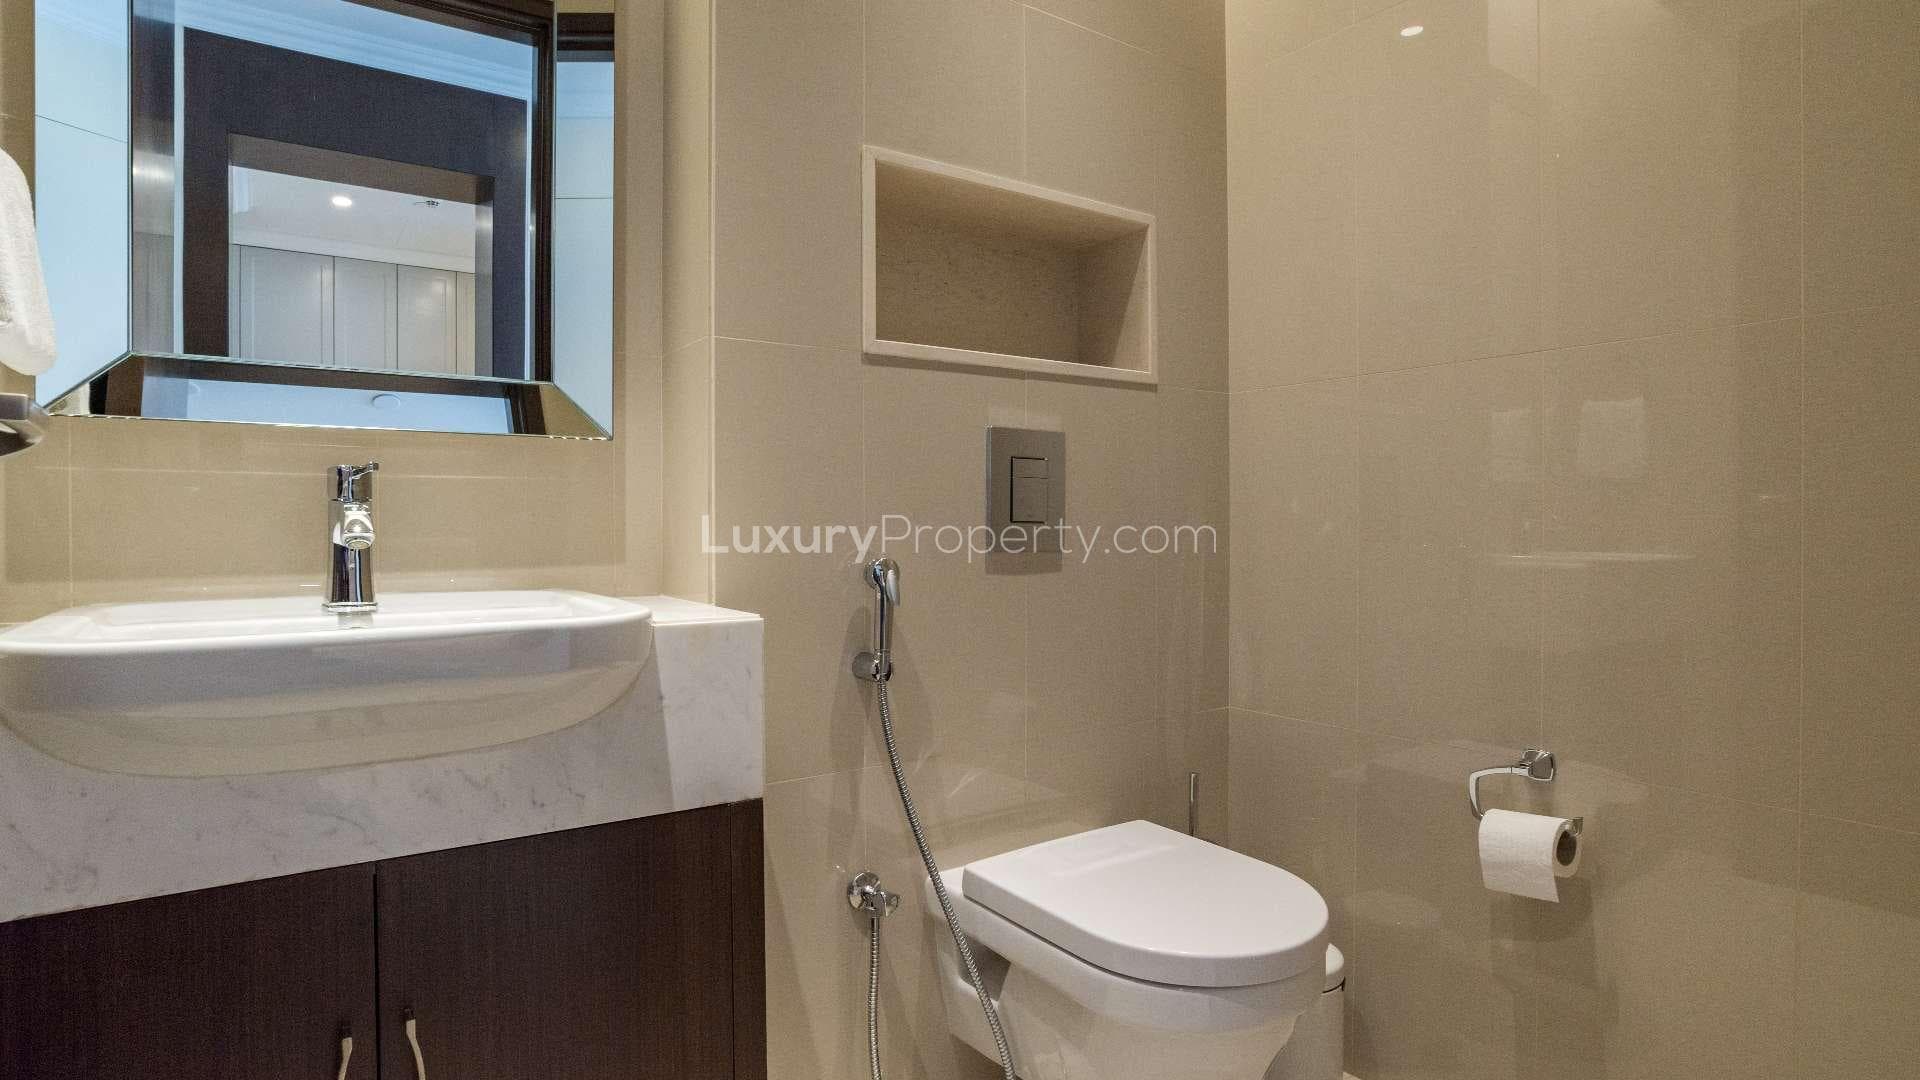 1 Bedroom Apartment For Sale The Address Residence Fountain Views Lp20135 17b5f239754aef00.jpg